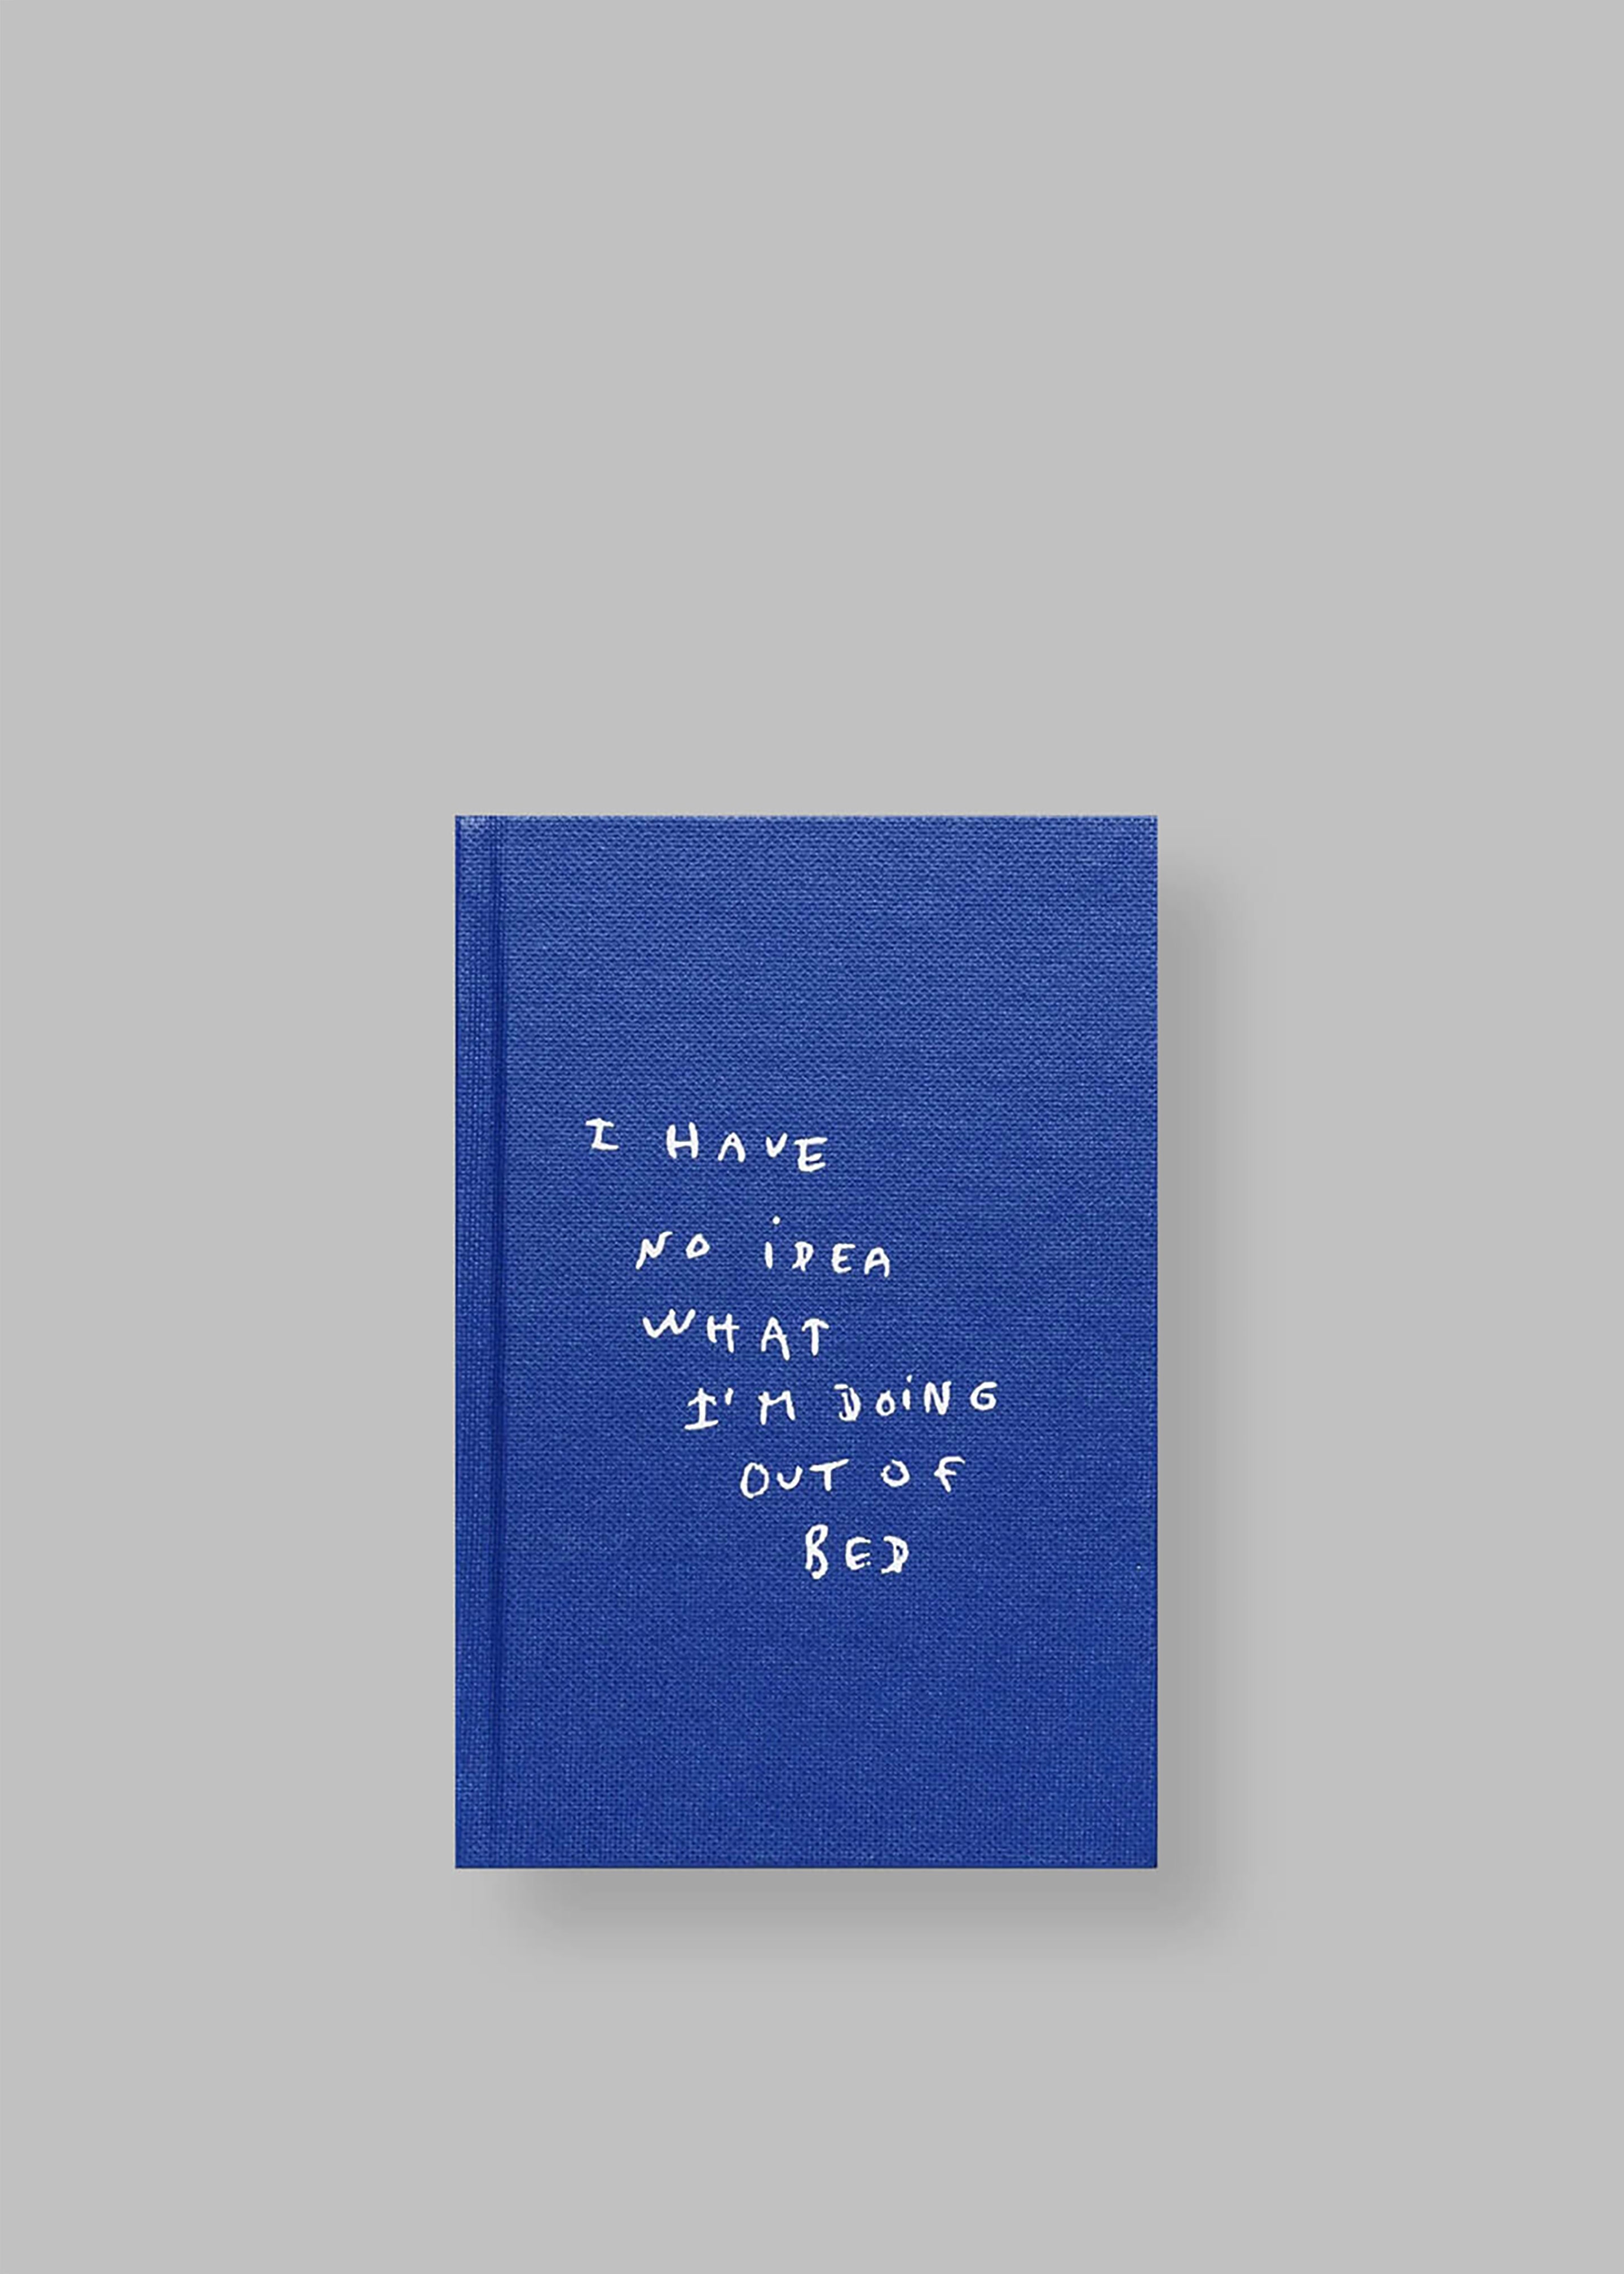 Thomas Lélu 'I Have No Idea What I'm Doing Out of Bed' Book - 1